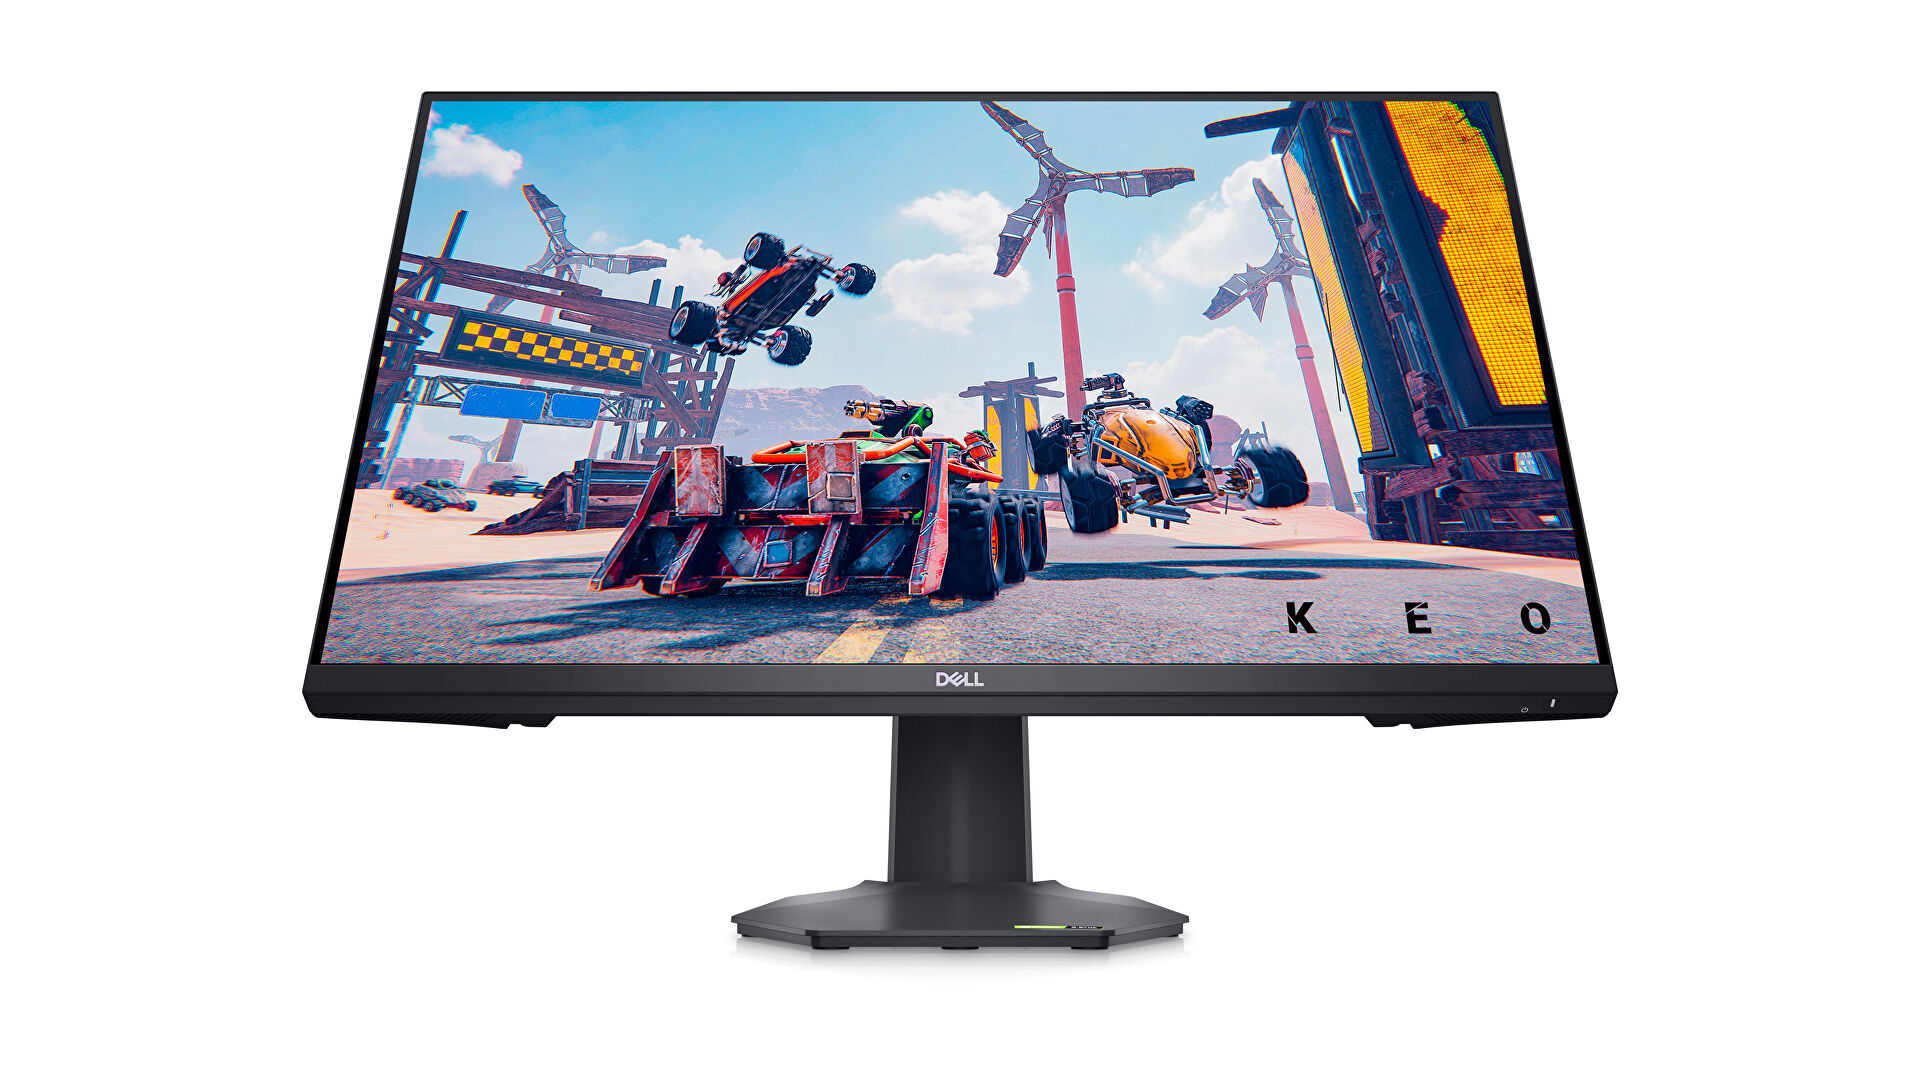 Get a Dell 1080p 165Hz gaming monitor for £129 after a £110 reduction